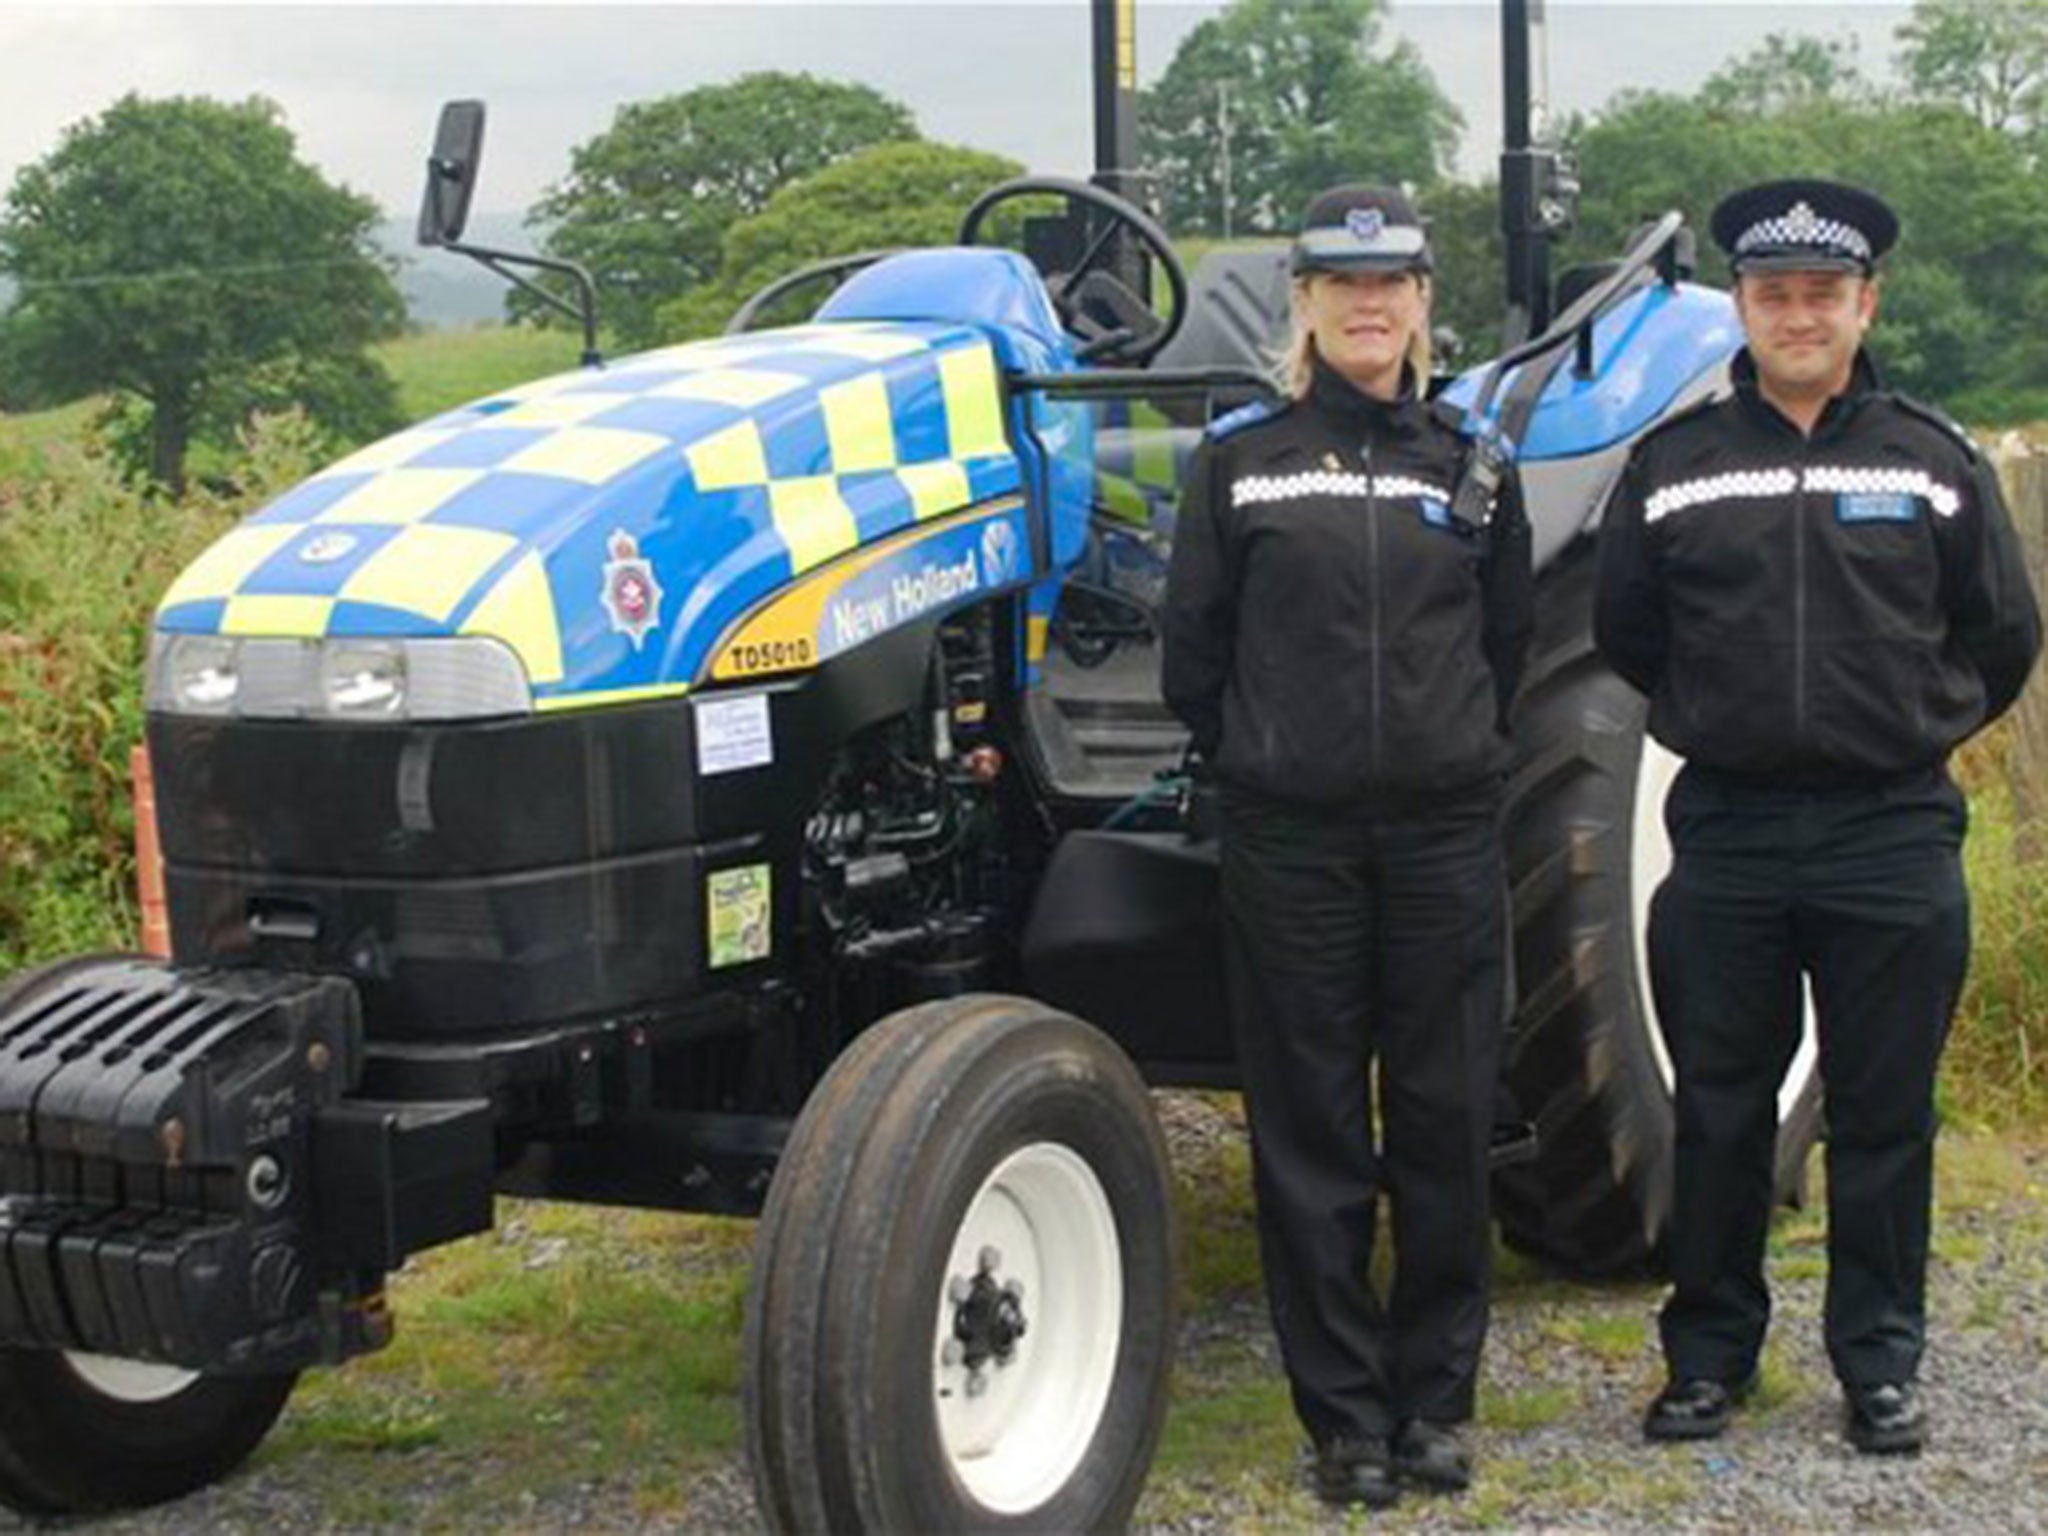 The new police tractor unveiled by Dyfed-Powys Police